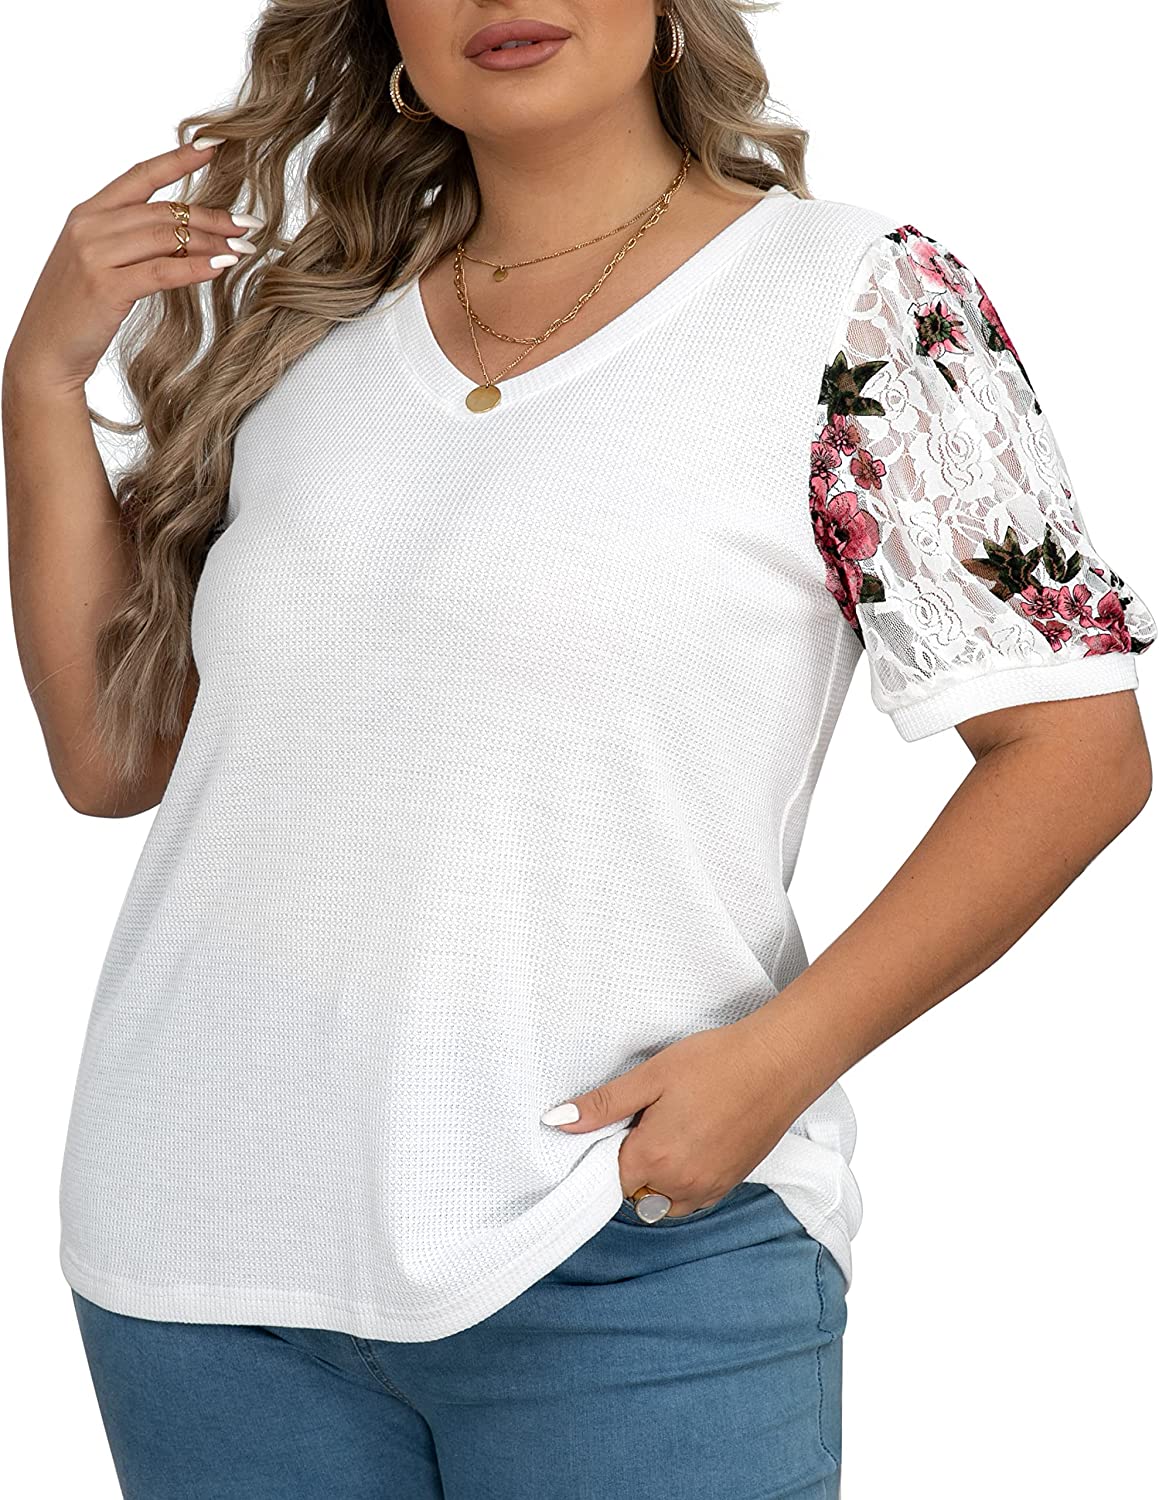 OLRIK Plus Size Tops for Women Summer Casual Womens Short Sleeve Lace Shirts  and Blouses White-Large at  Women's Clothing store